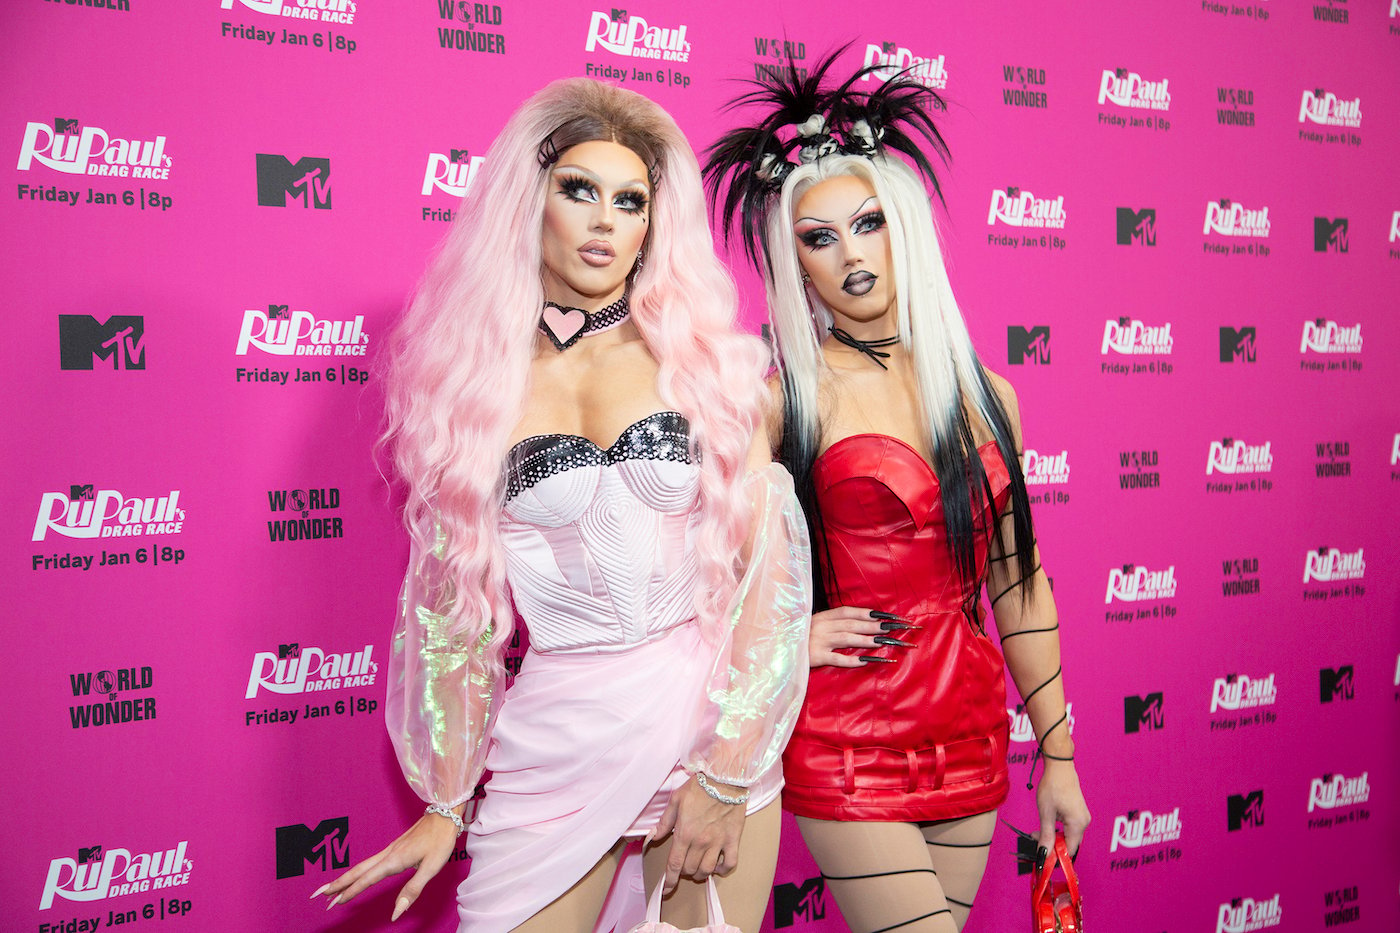 Twin 'Drag Race' contestants Sugar and Spice, who lip synced against each other, on the red carpet